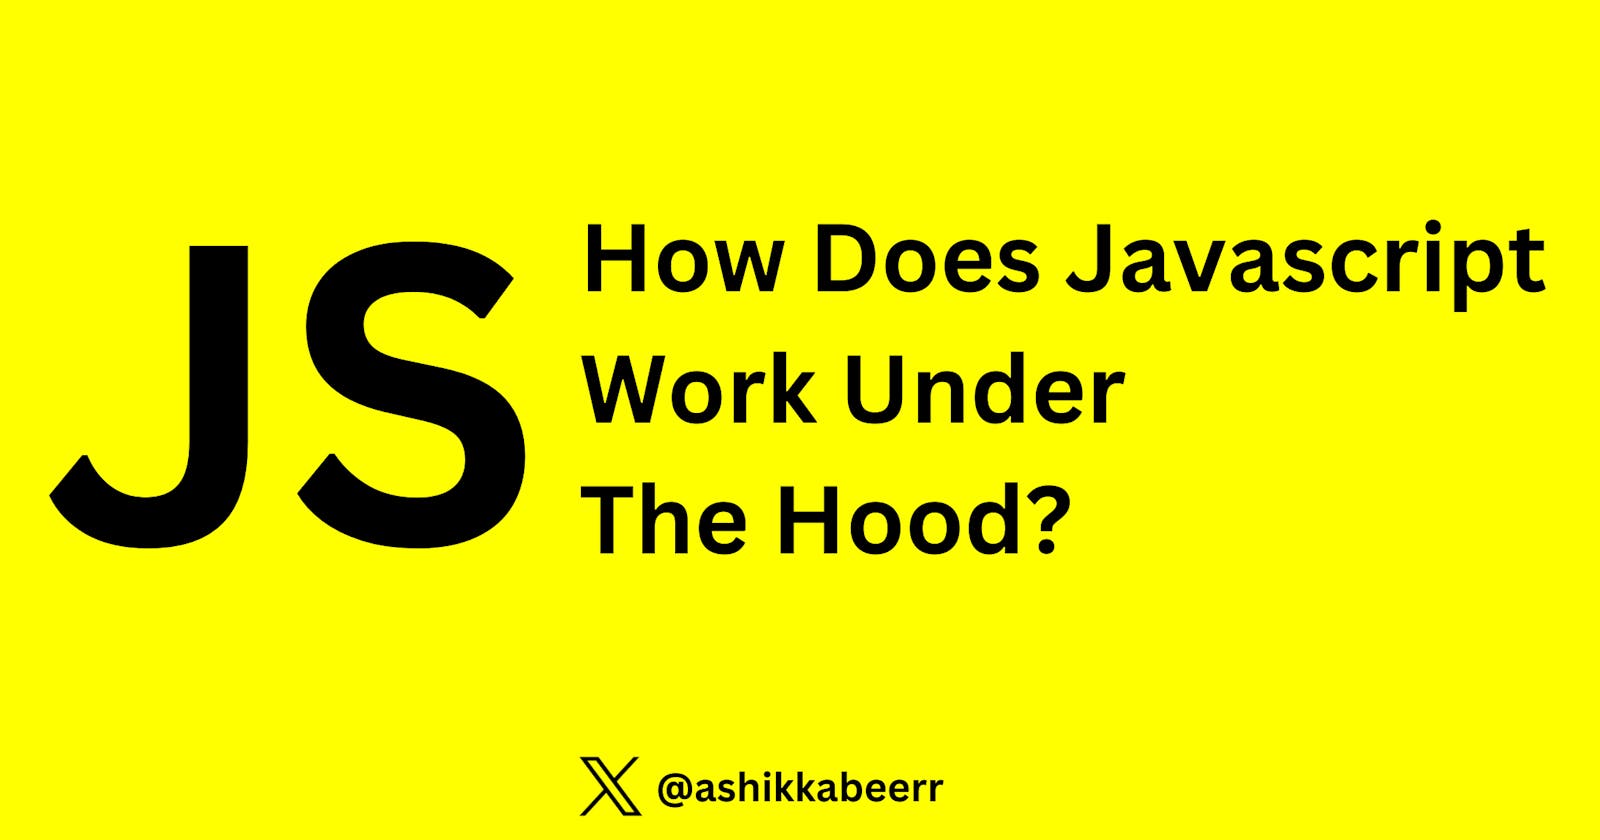 How Does Javascript Work Under The Hood?